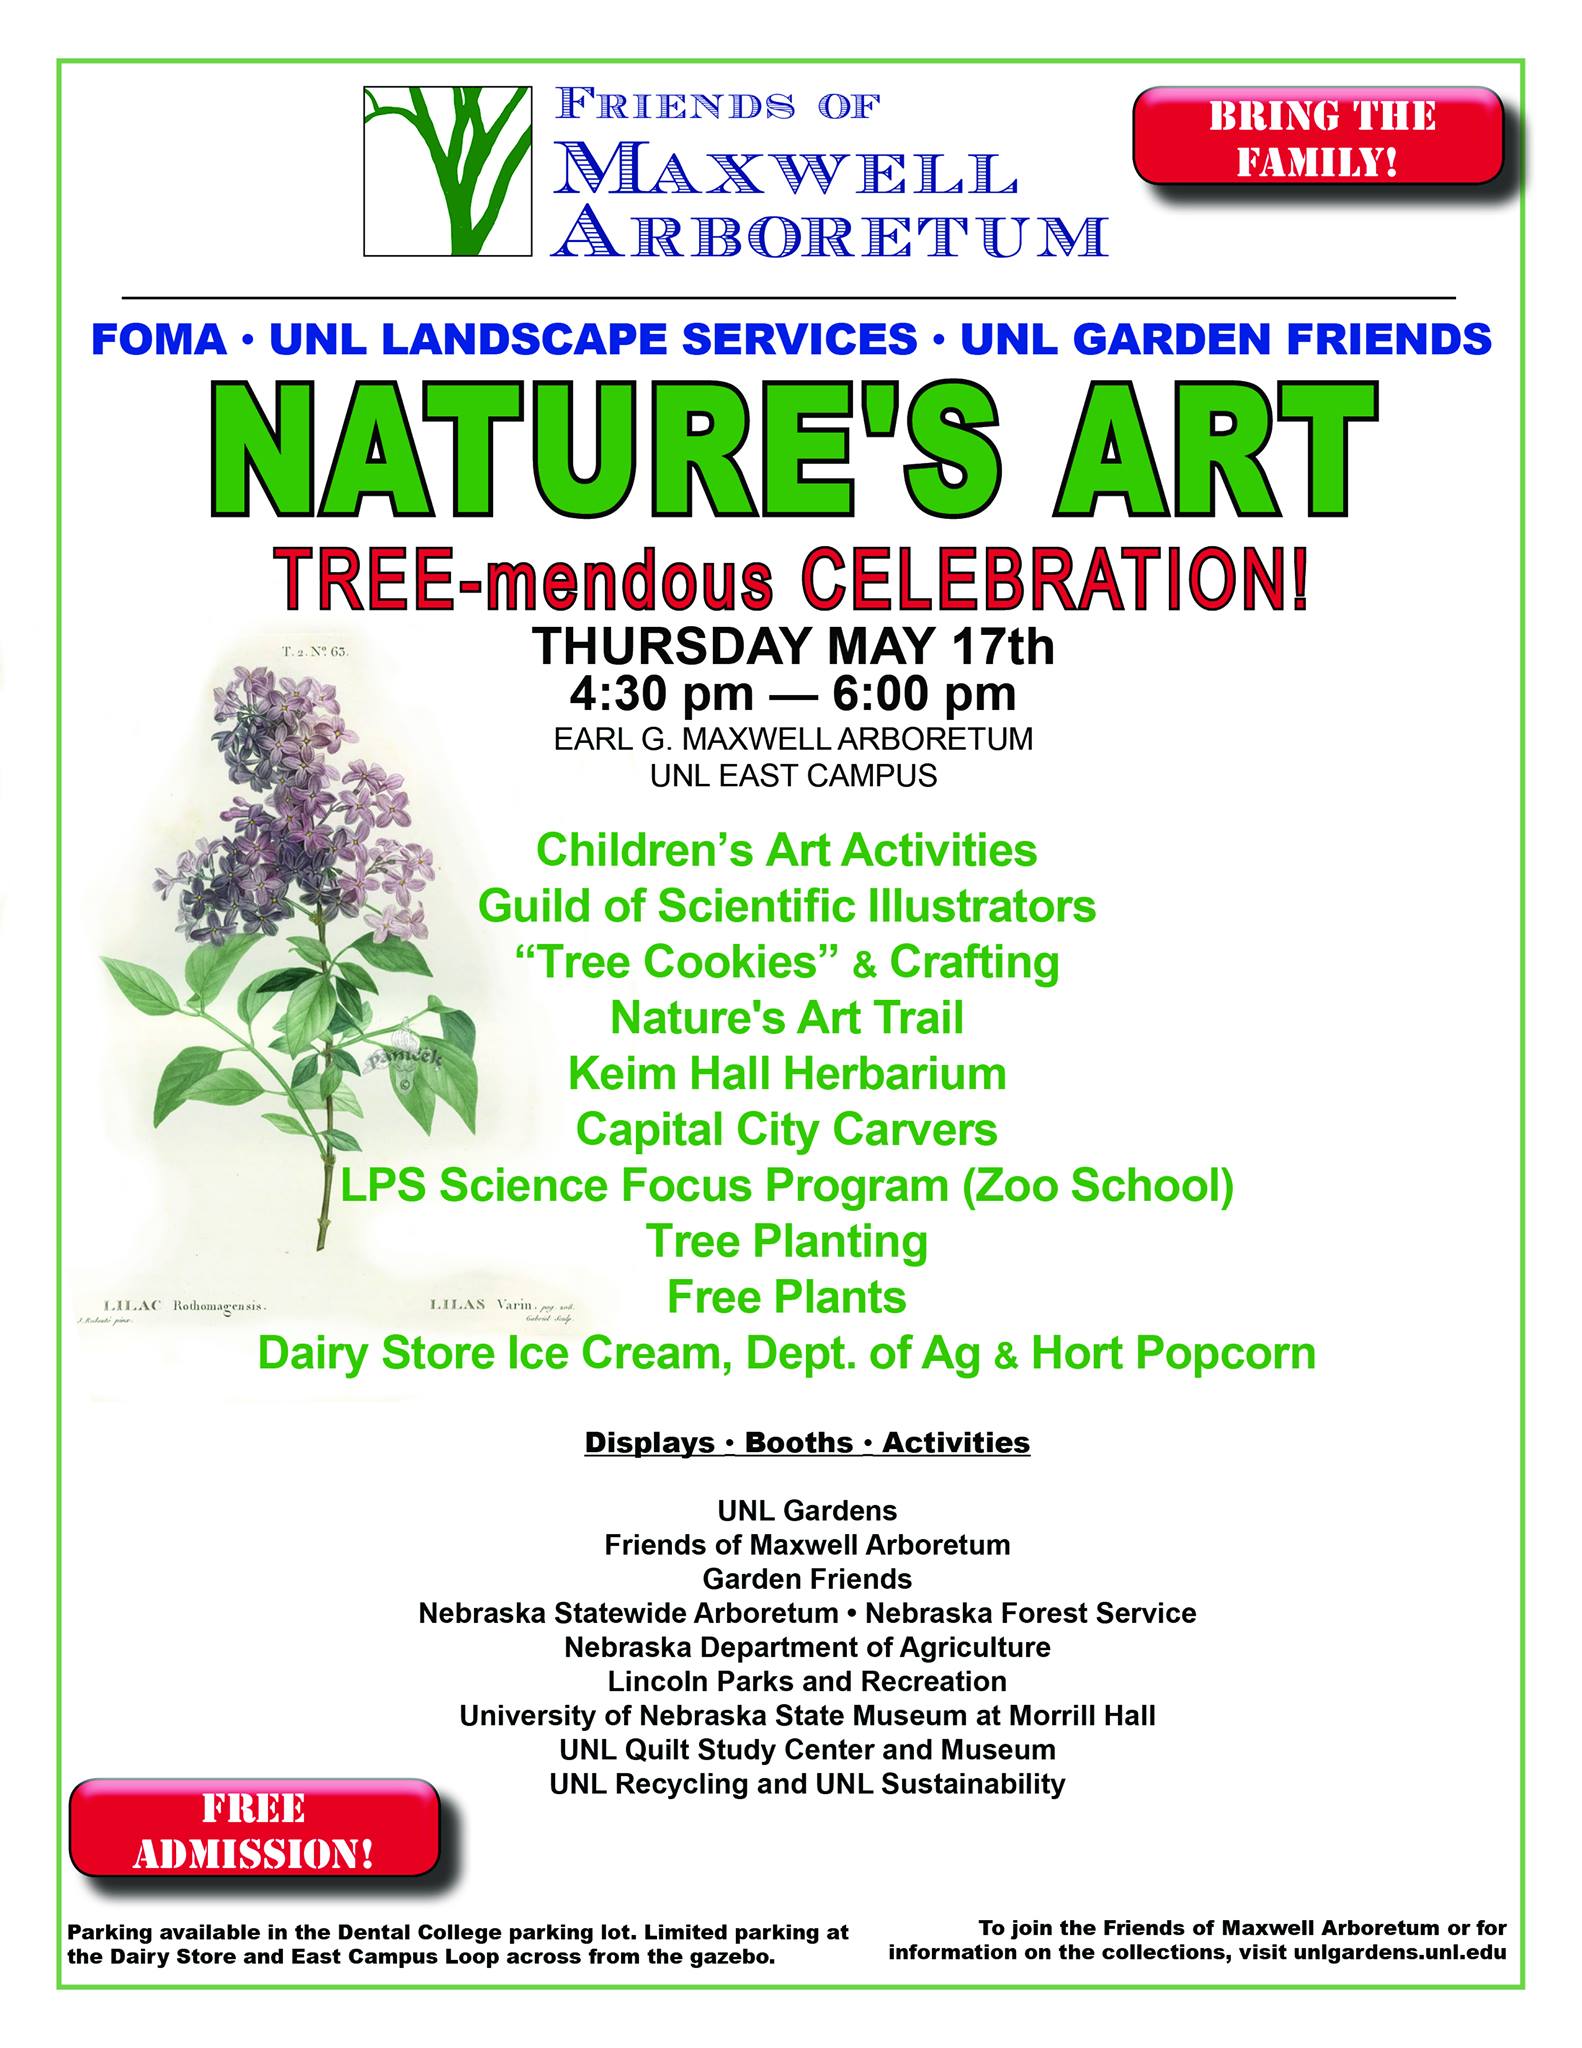 Friend's of Maxwell Arboretum Nature's Art TREE-mendous Celebration is May 17.